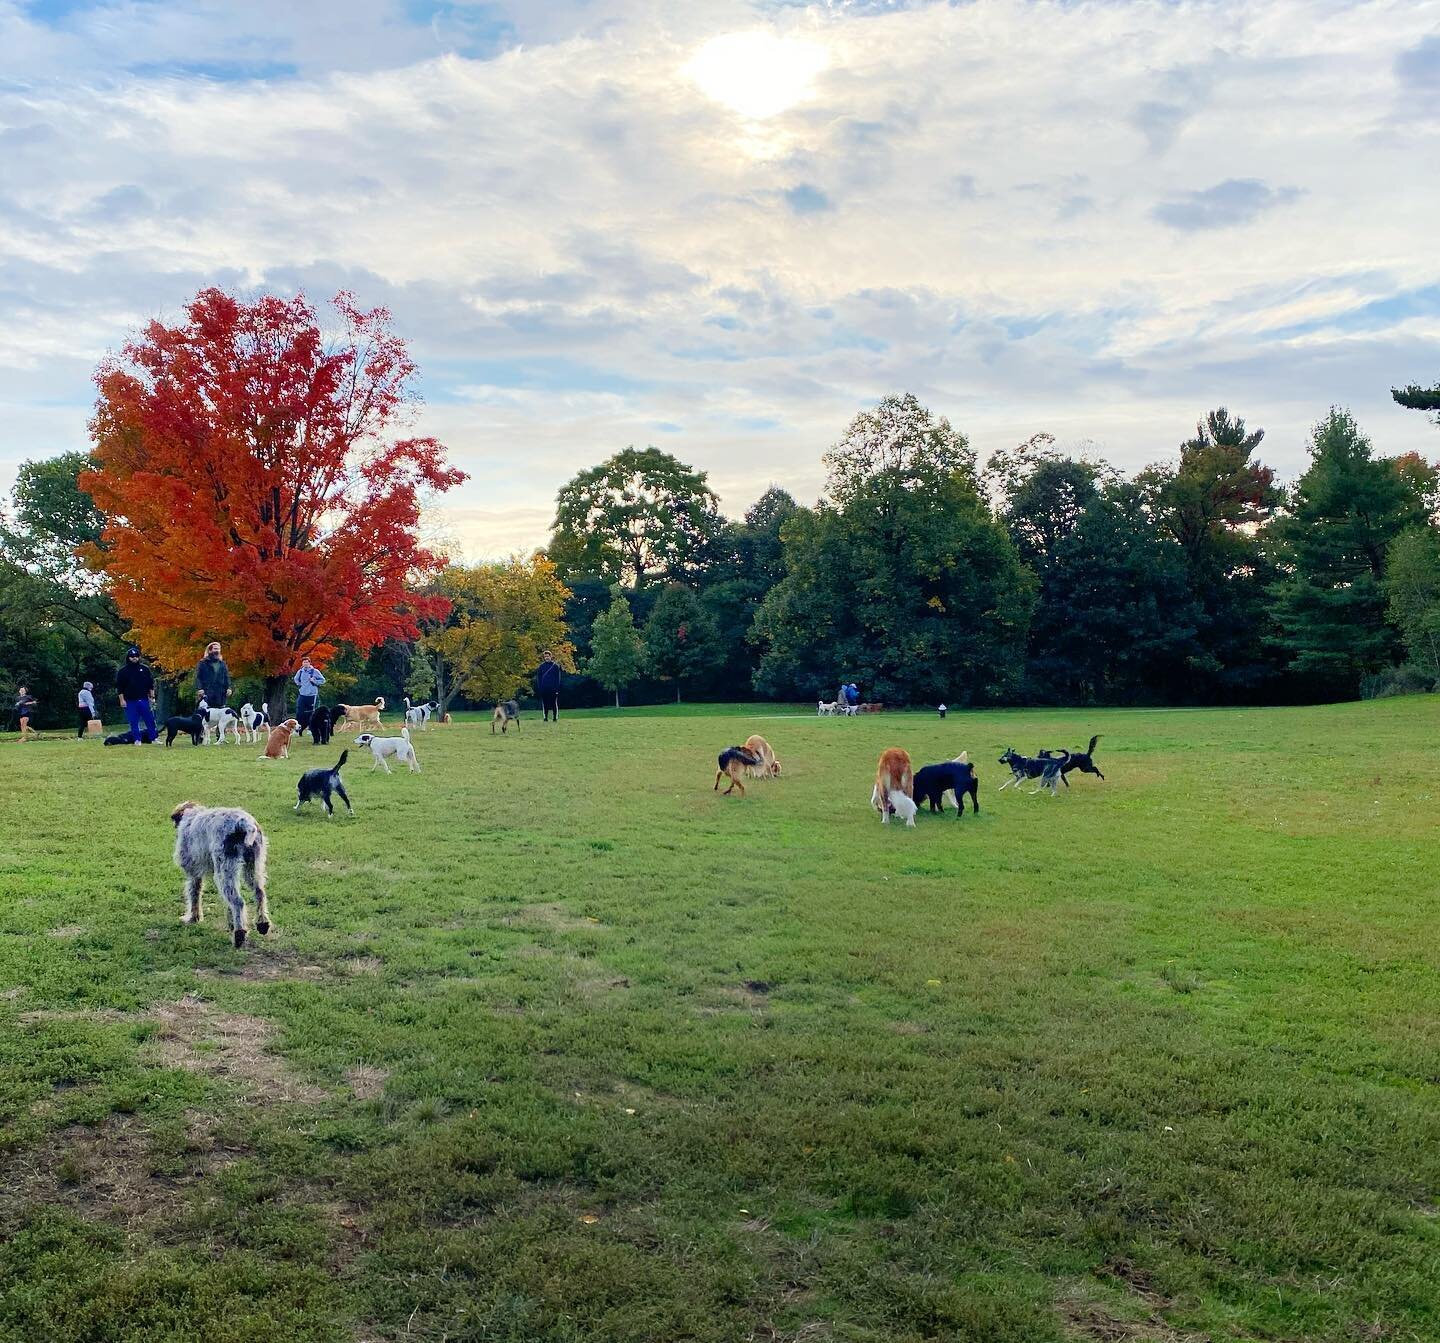 Watching the dogs during off-leash hours at Prospect Park. What&rsquo;s your other therapy?⁣
.⁣
.⁣
.⁣
#mentalhealth #dogsofinstagram #offleash #autumn #folliage #fallcolors #dogtherapy #therapy